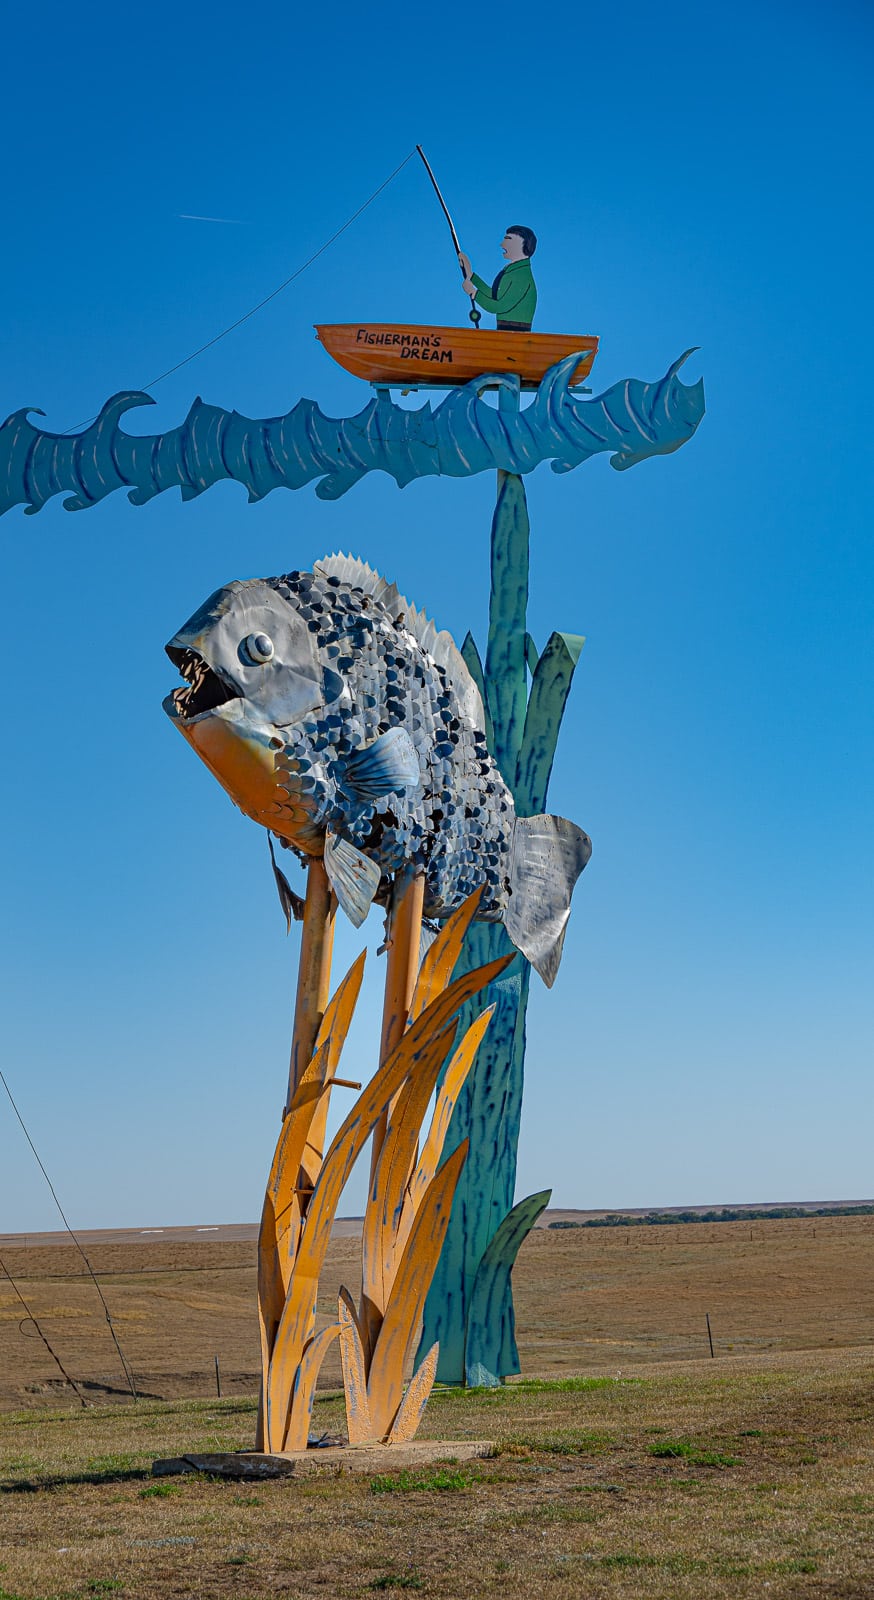 This is a detail of one of the sections in the sculpture by Gary Greff, called Fisherman's Dream. It is located along the Enchanted Highway that runs between I-94 and Regent, North Dakota.